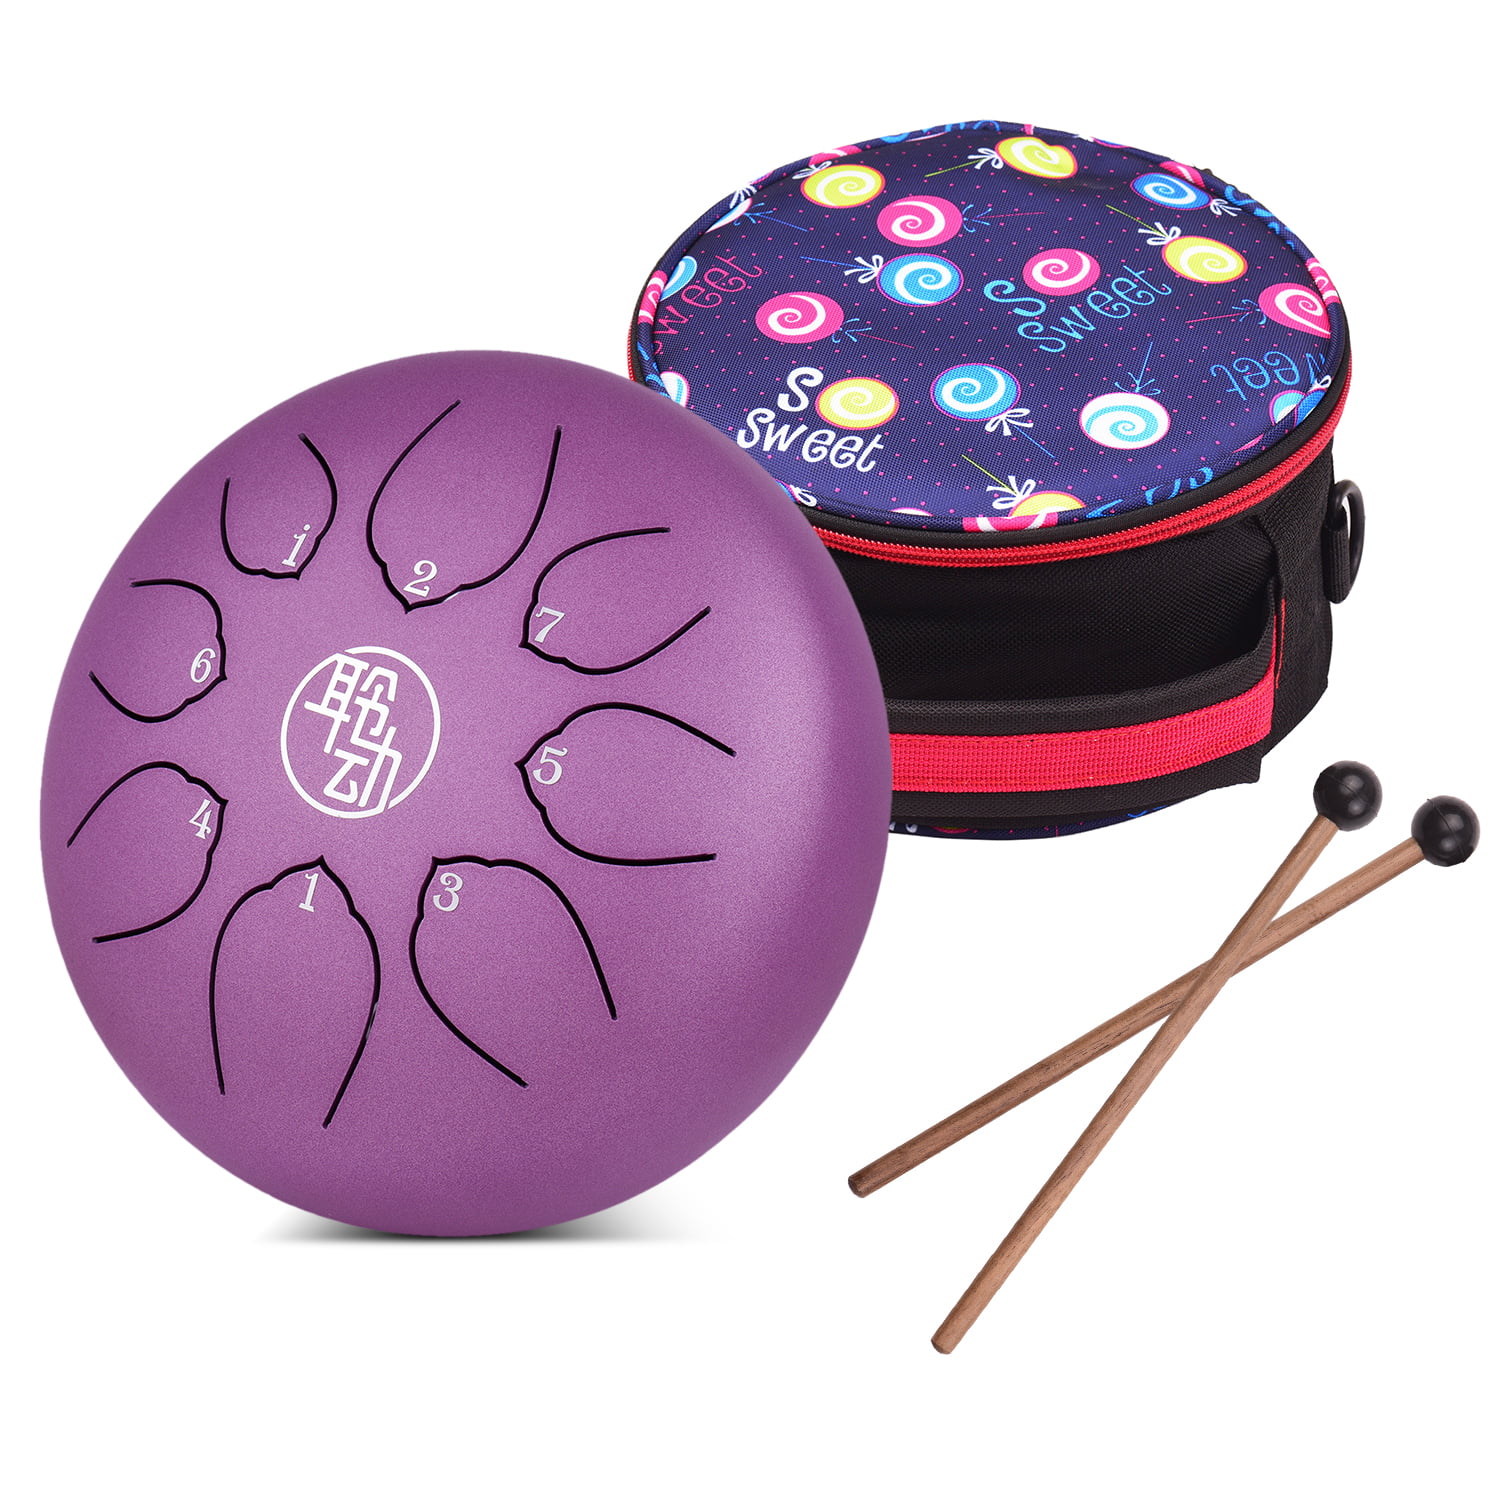 Tongue Drum purple Ethereal Sound 6 inches Tongue Percussion Drum Handpan Drum Tongue Handpan Drum Hand Drum with Carrying Bag Accurate Tone